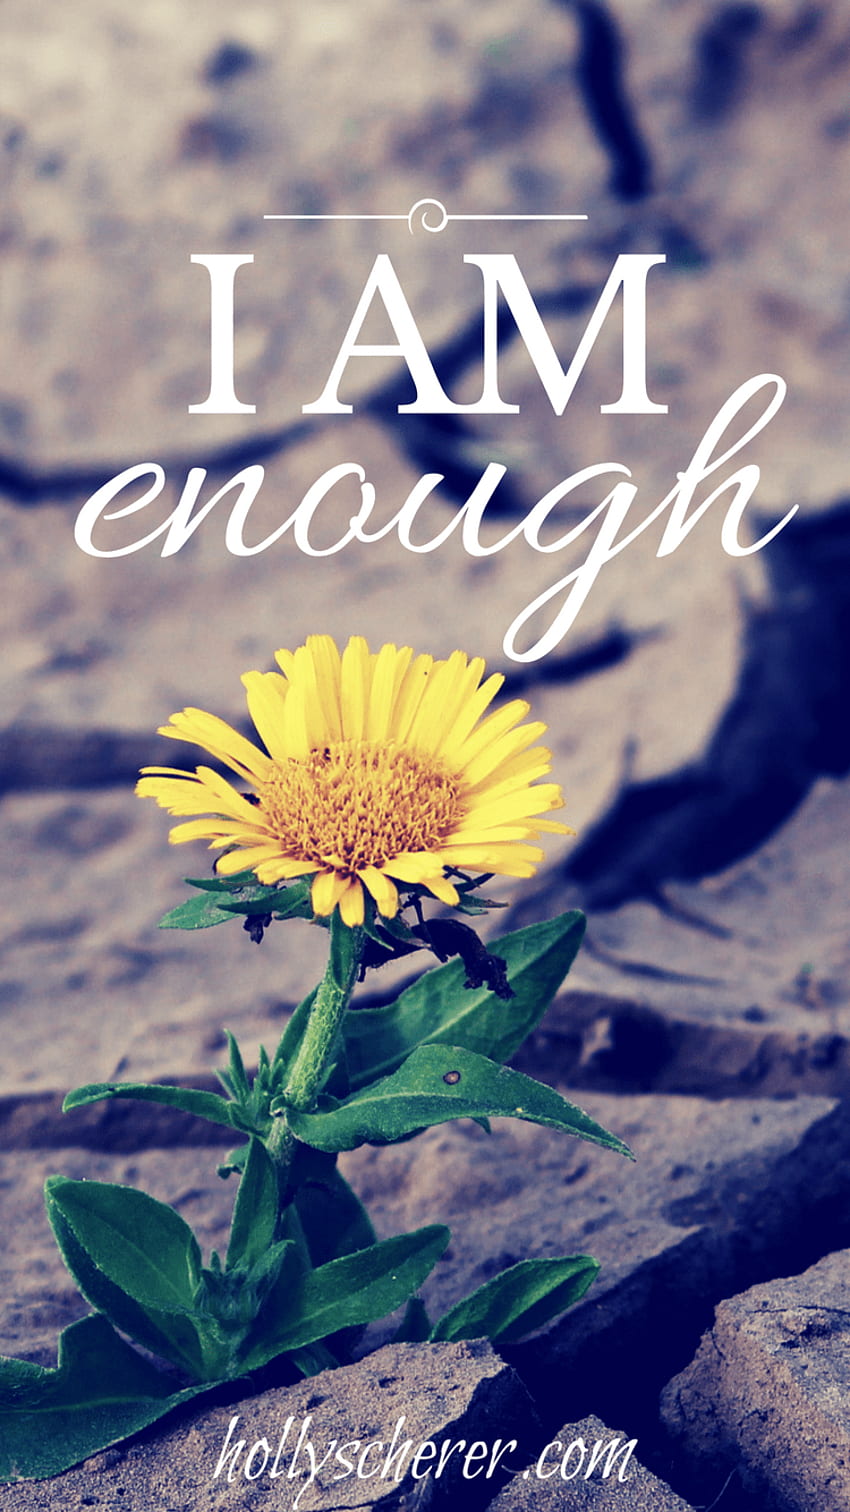 This is why you're already enough • Holly Scherer, I AM Enough HD phone wallpaper